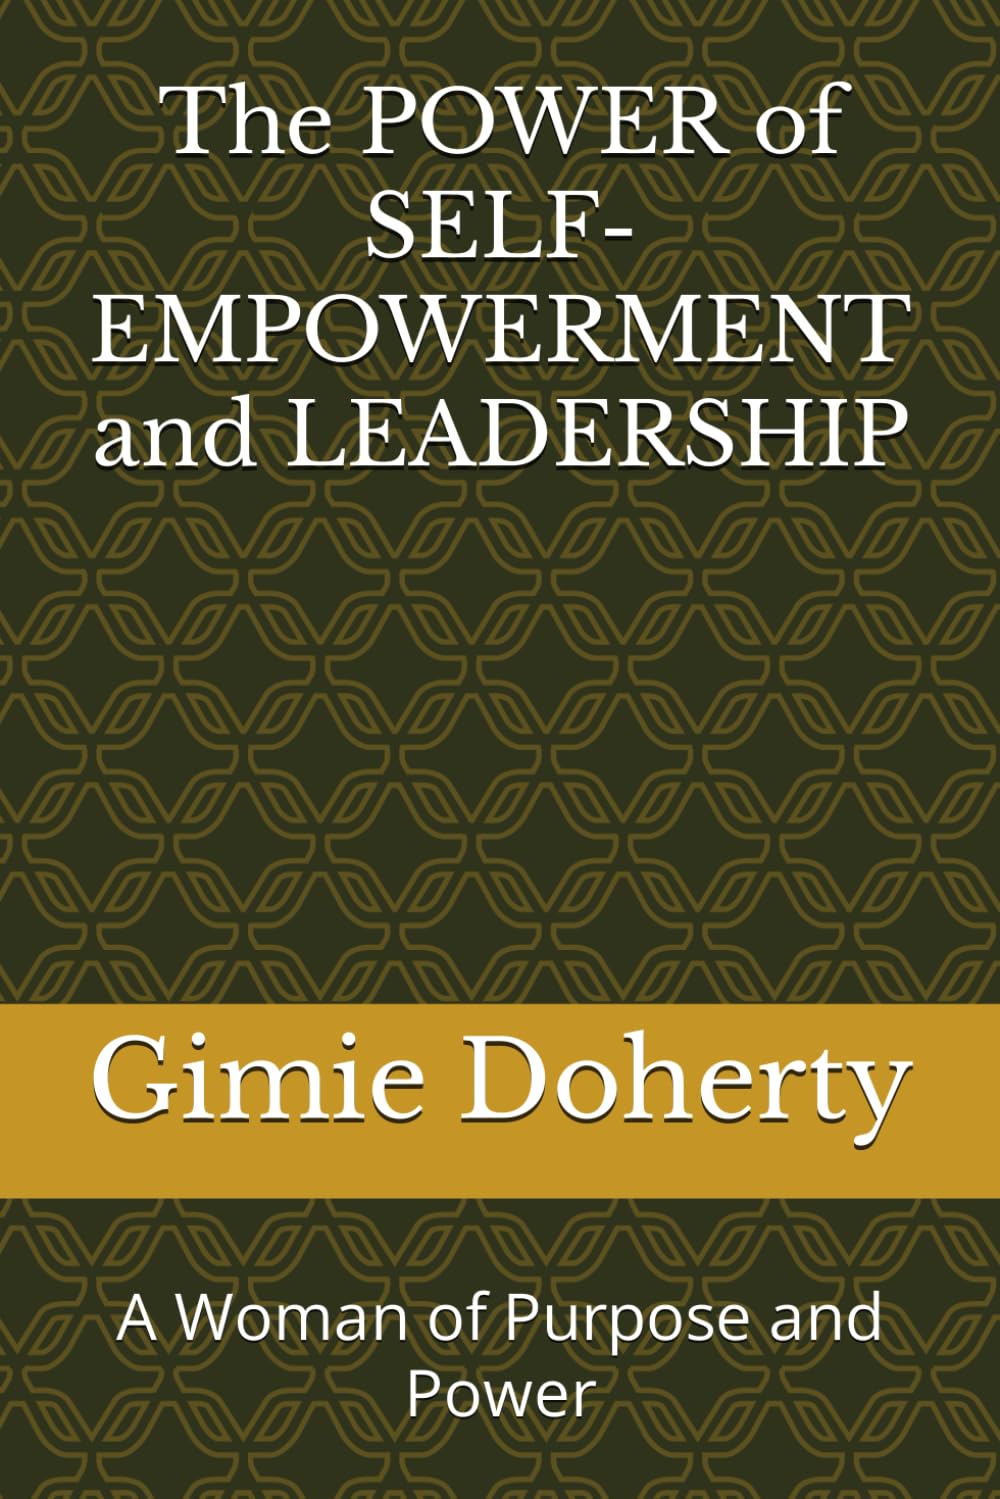 Book-The POWER of SELF-EMPOWERMENT and LEADERSHIP: A Woman of Purpose and Power - Organic Hair Solution, LLC